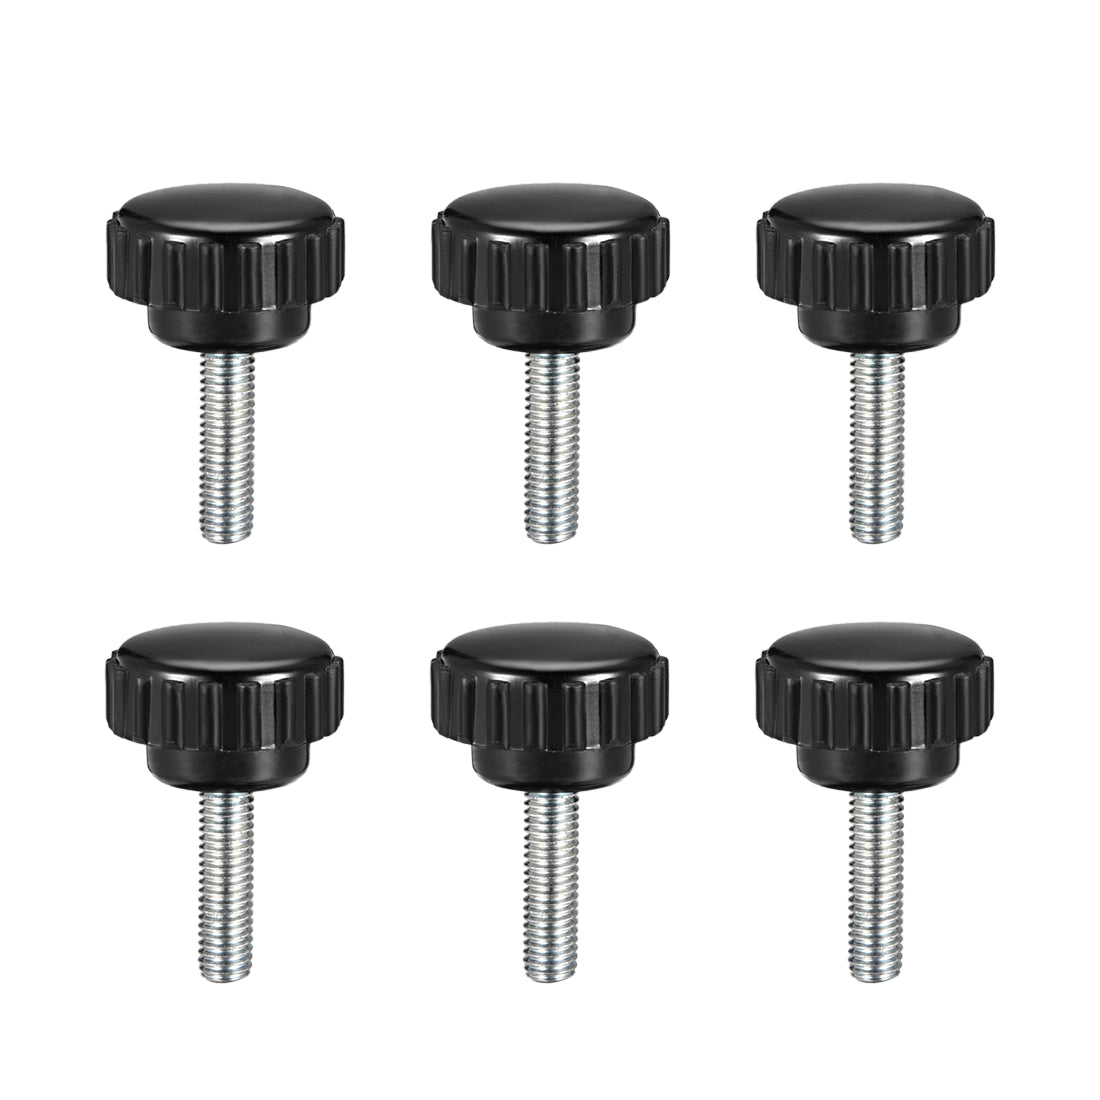 Uxcell Uxcell M5 x 40mm Male Thread Knurled Clamping Knobs Grip Thumb Screw on Type 6 Pcs